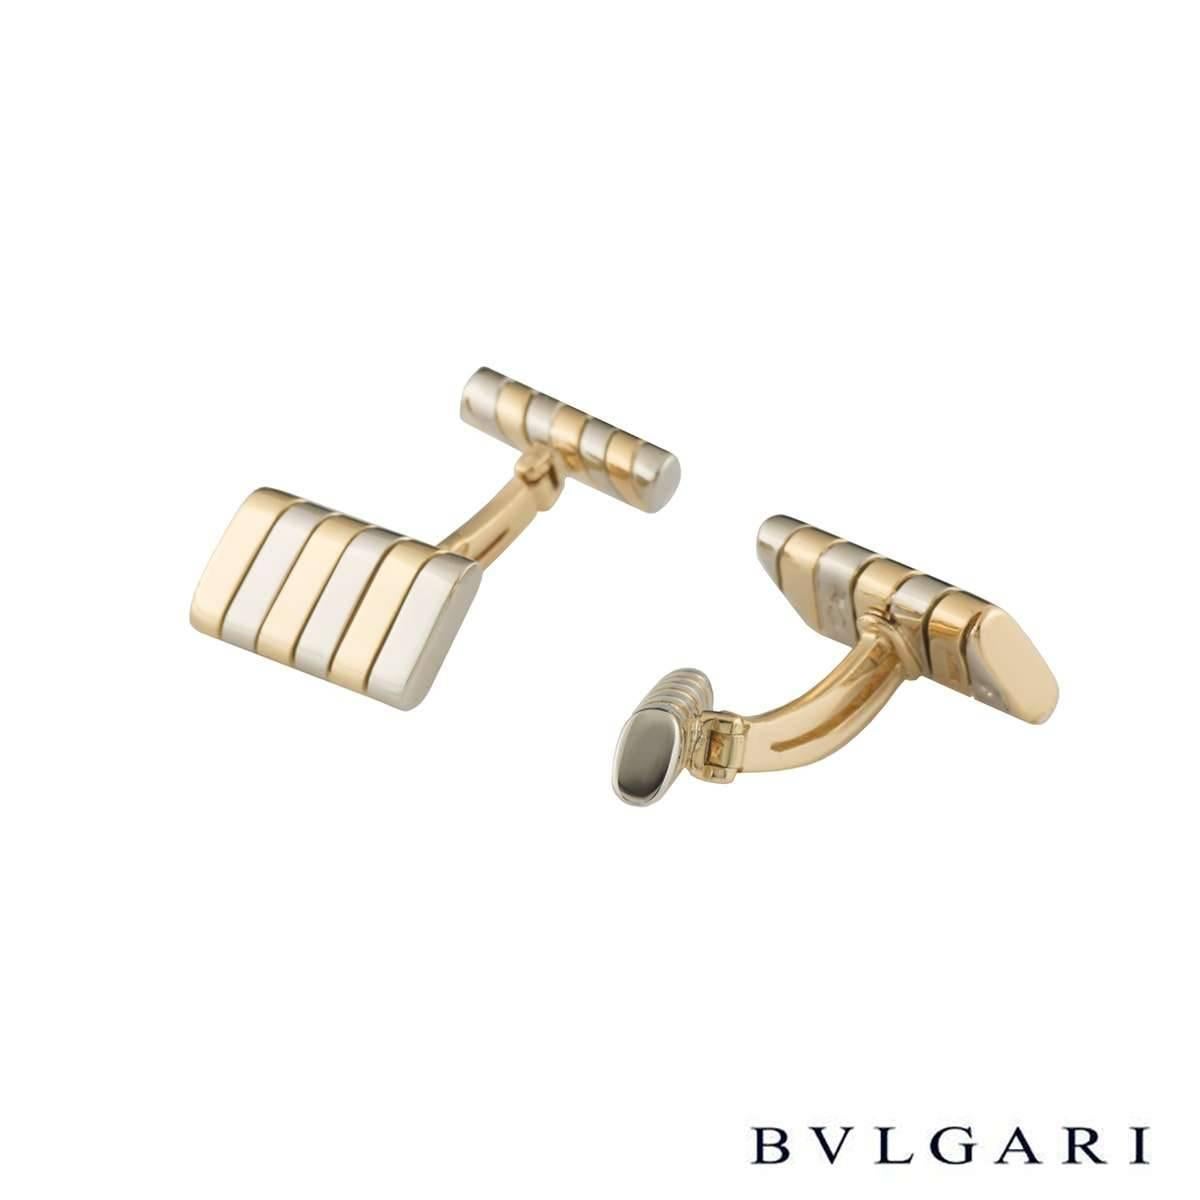 A smart pair of 18k yellow and white gold Bvlgari cufflinks from the Tubogas collection. The cufflinks feature a rhombus motif with yellow and white gold stripes throughout. The cufflinks feature a T-bar fitting and has a gross weight of 12.90